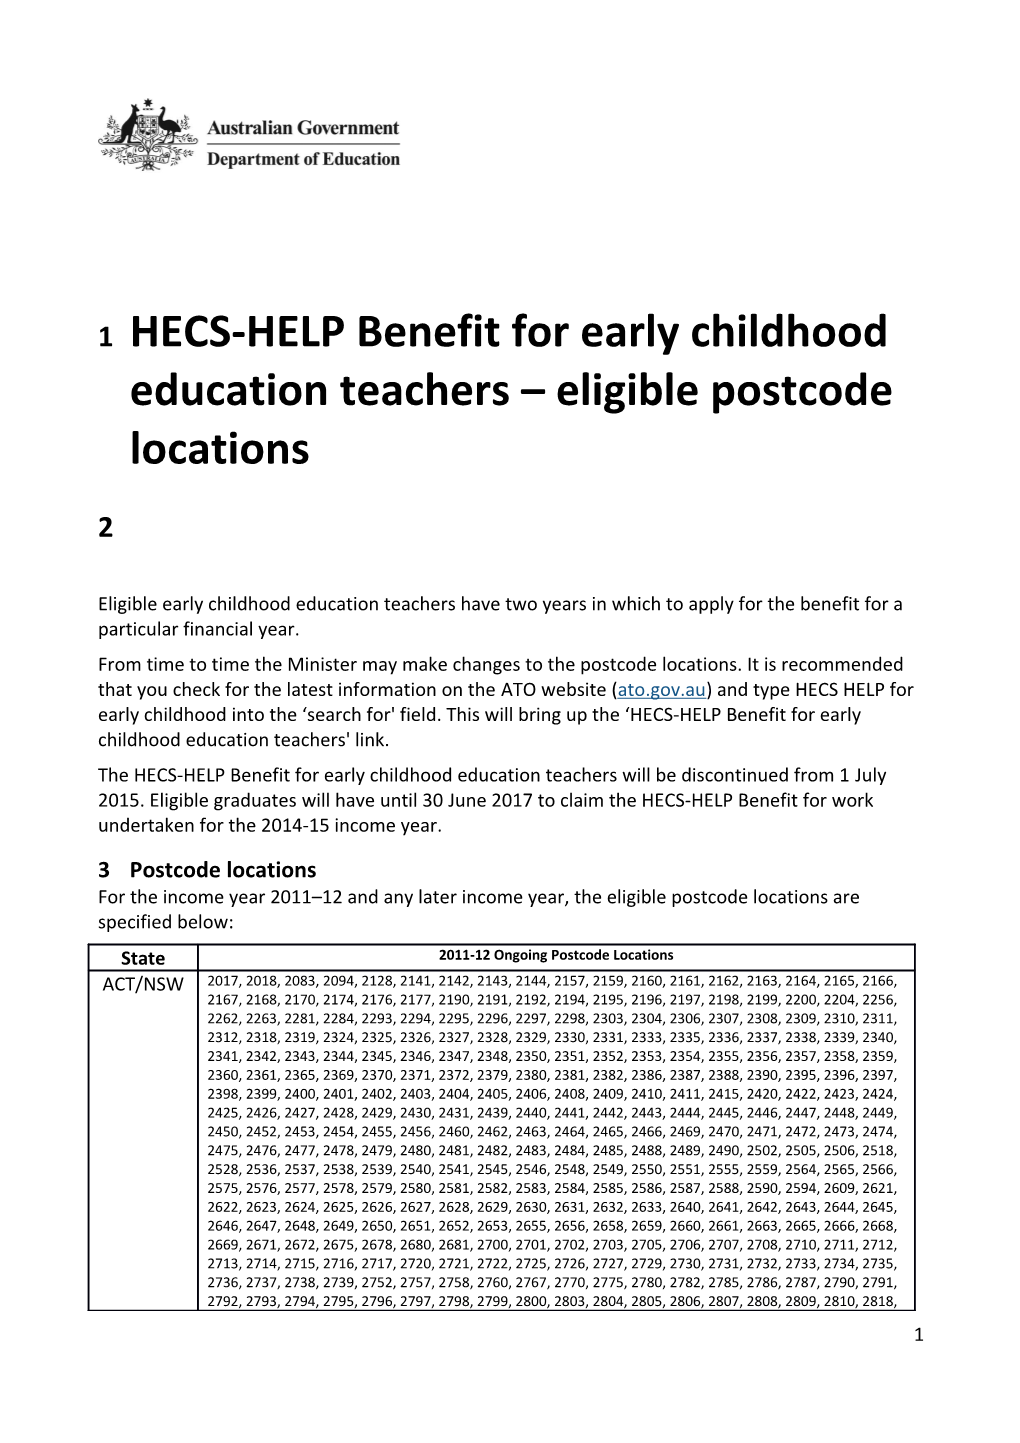 HECS-HELP Benefit for Early Childhood Education Teachers Eligible Postcode Locations